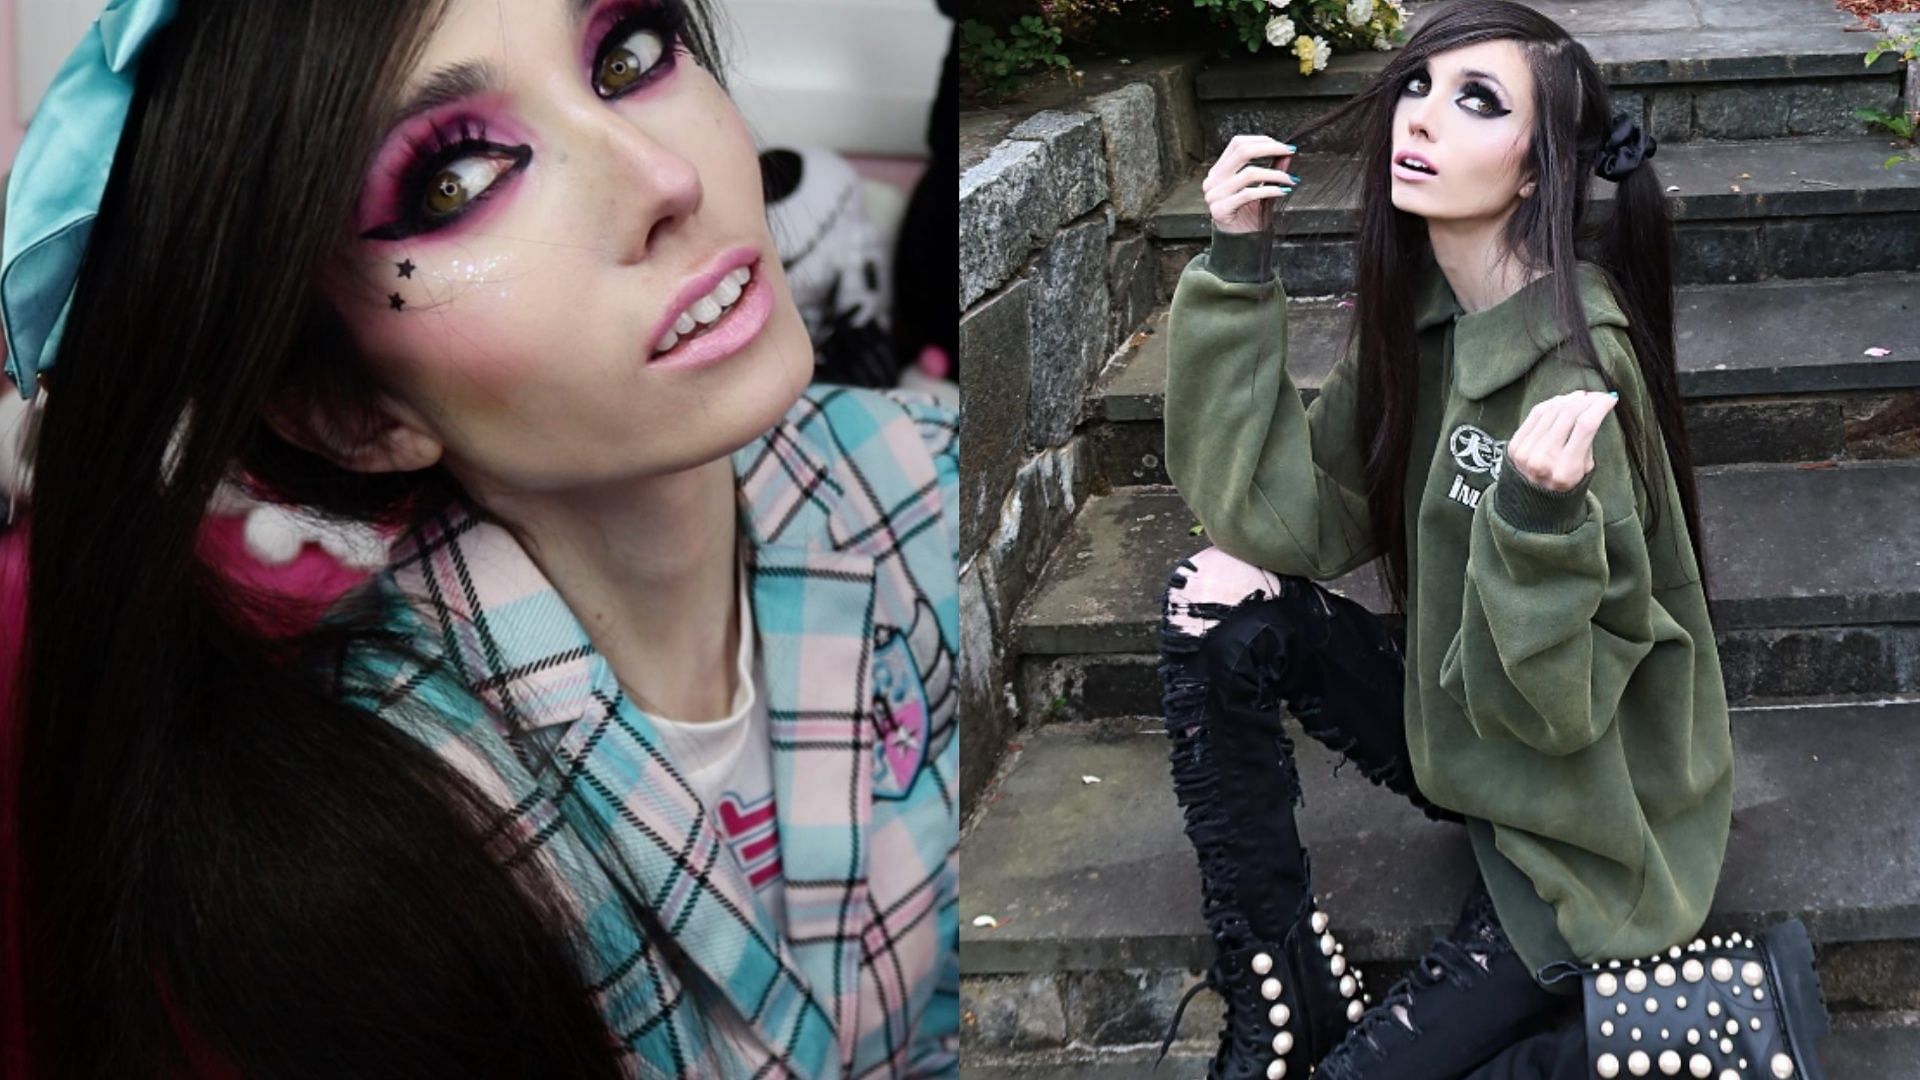 Eugenia Cooney "We are just watching someone die on camera" YouTuber